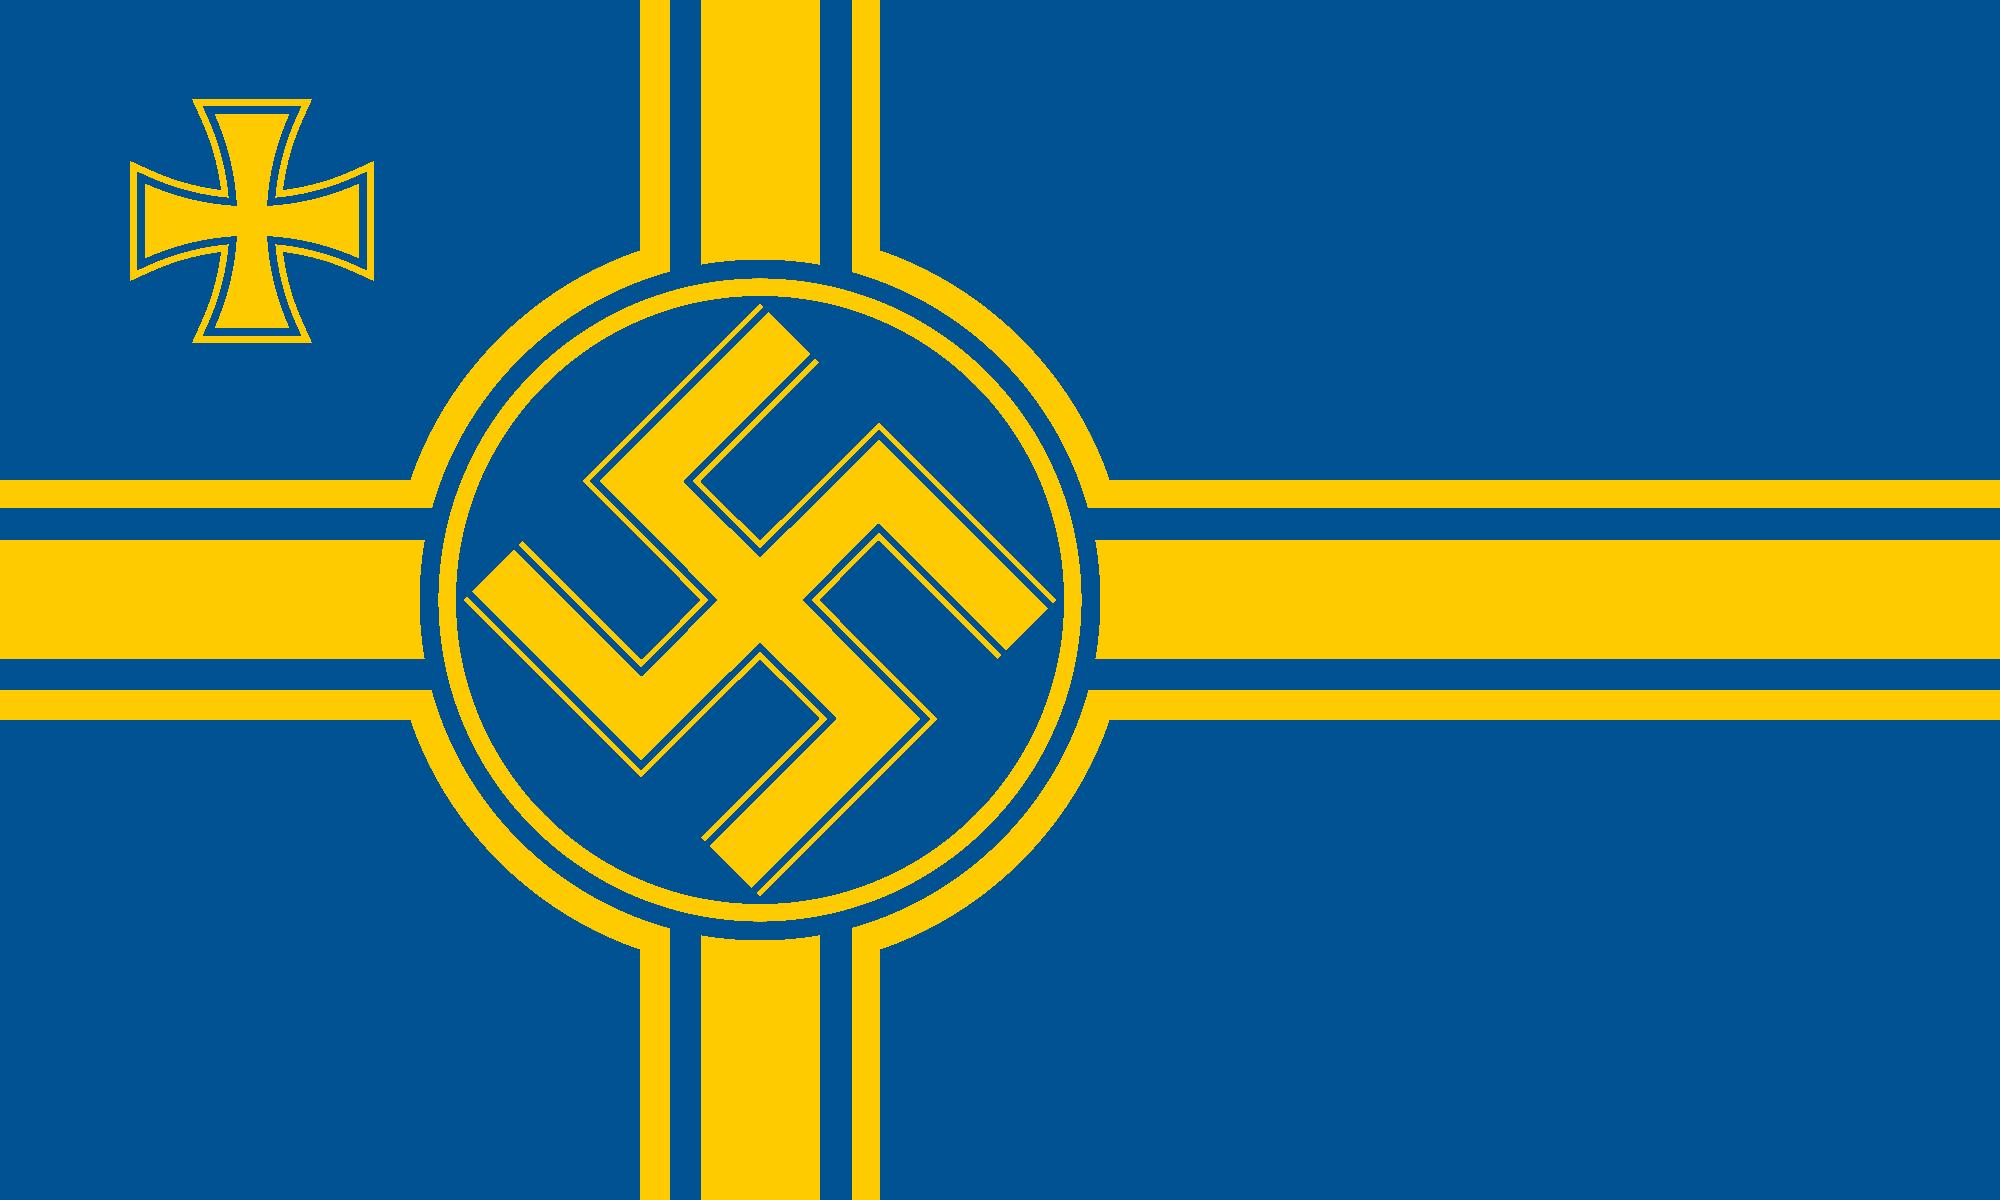 Amazing Flag Of Sweden Pictures & Backgrounds